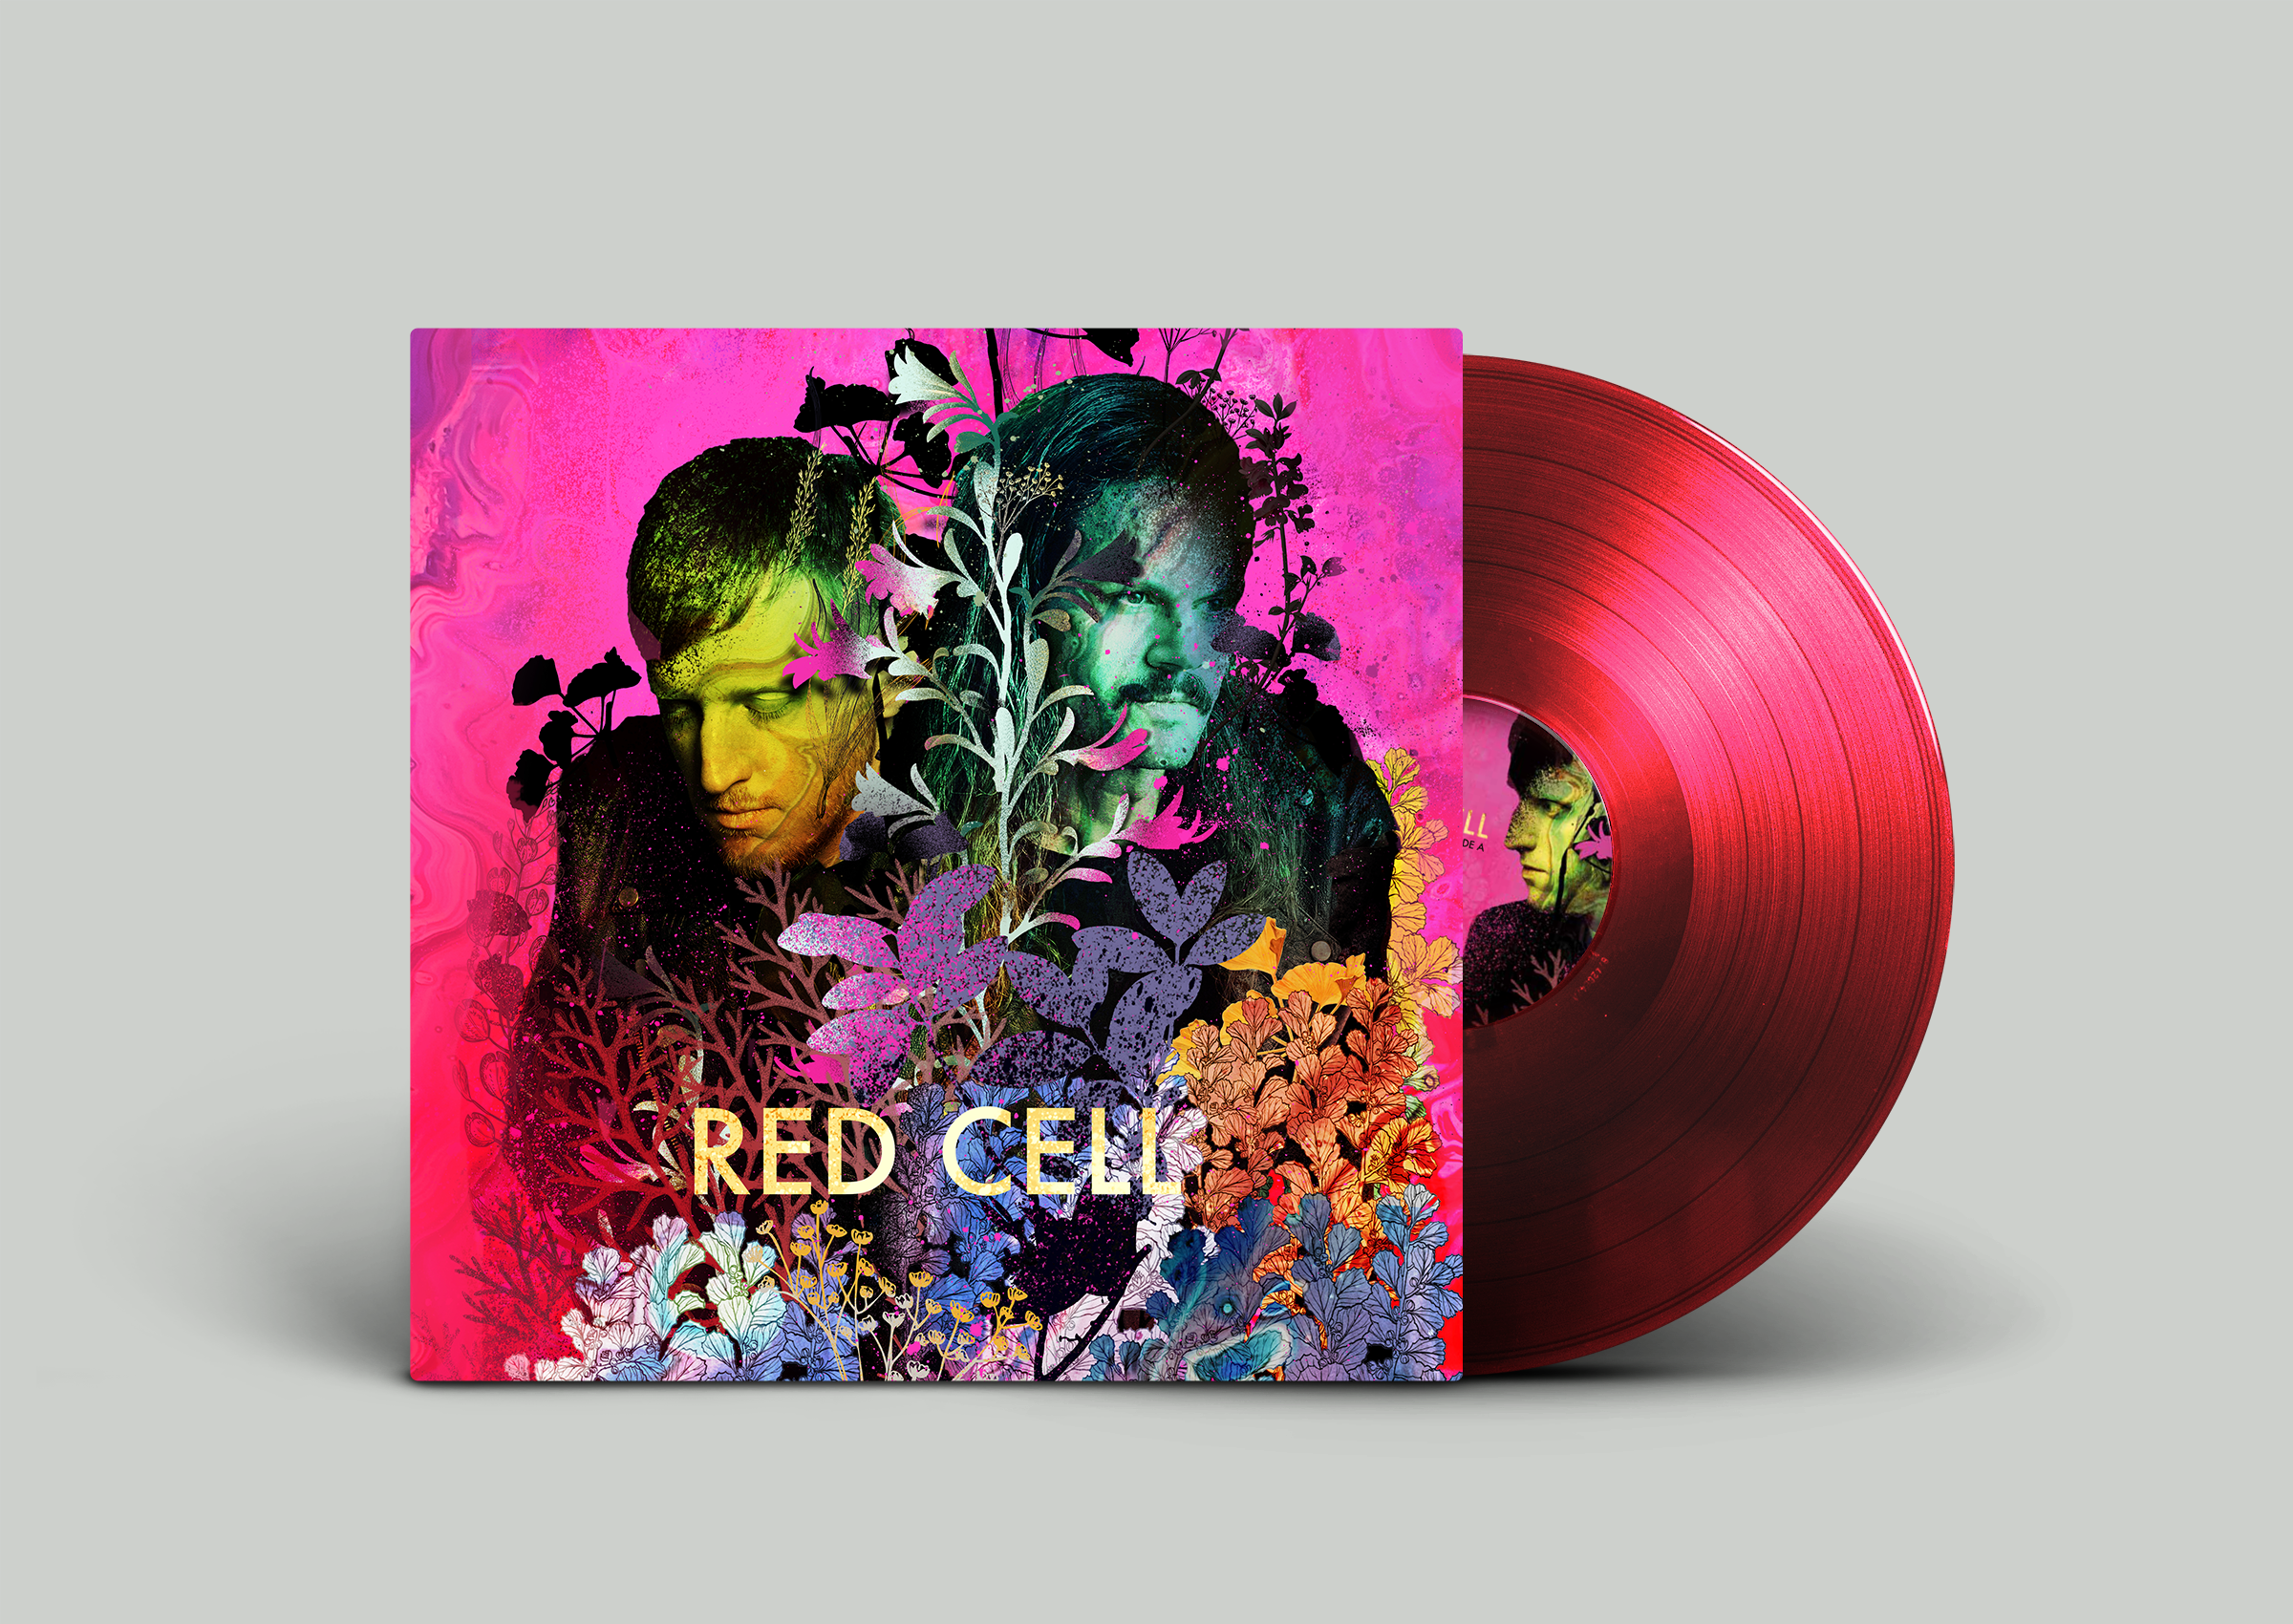 Buy Red Cell - Limited Transparent Red Vinyl